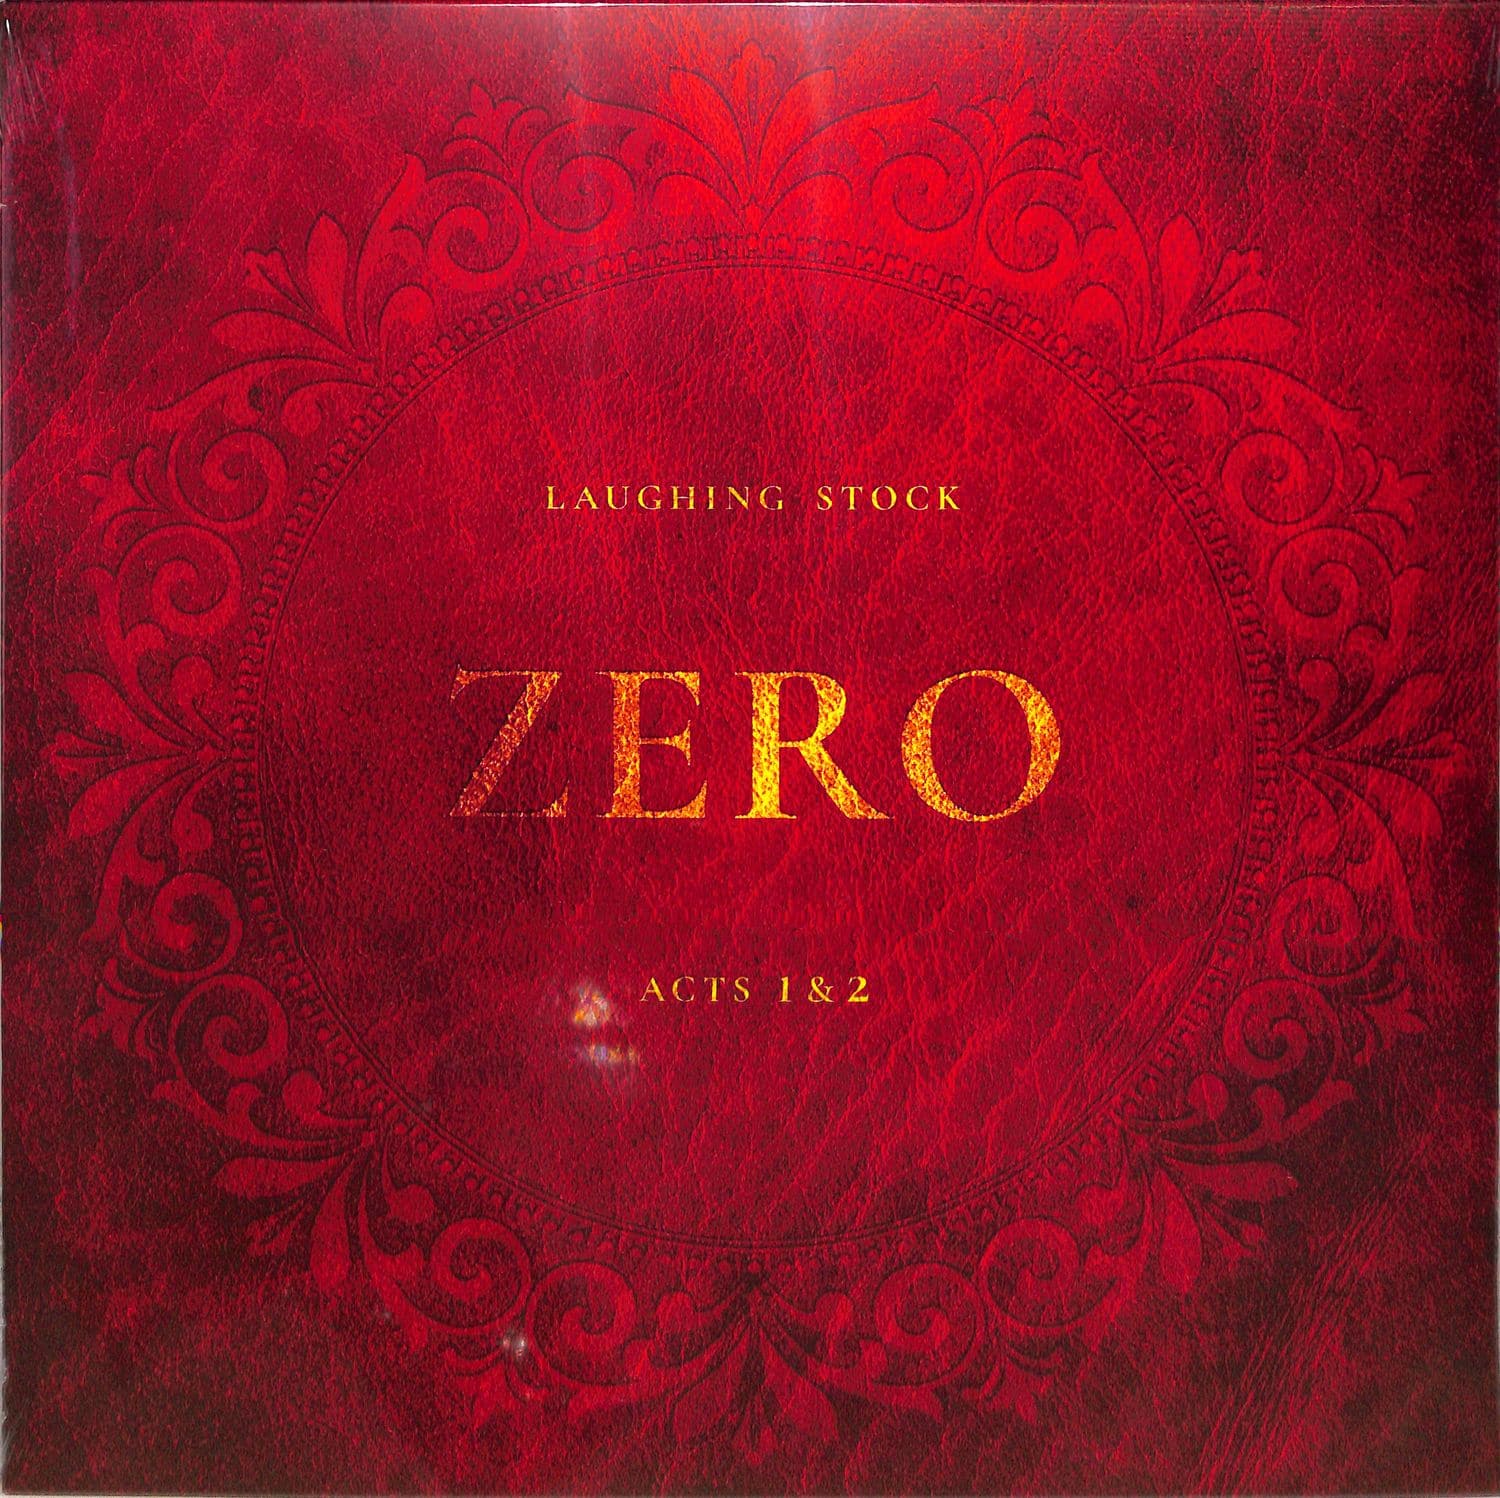 Laughing Stock - ZERO, ACTS 1&2 